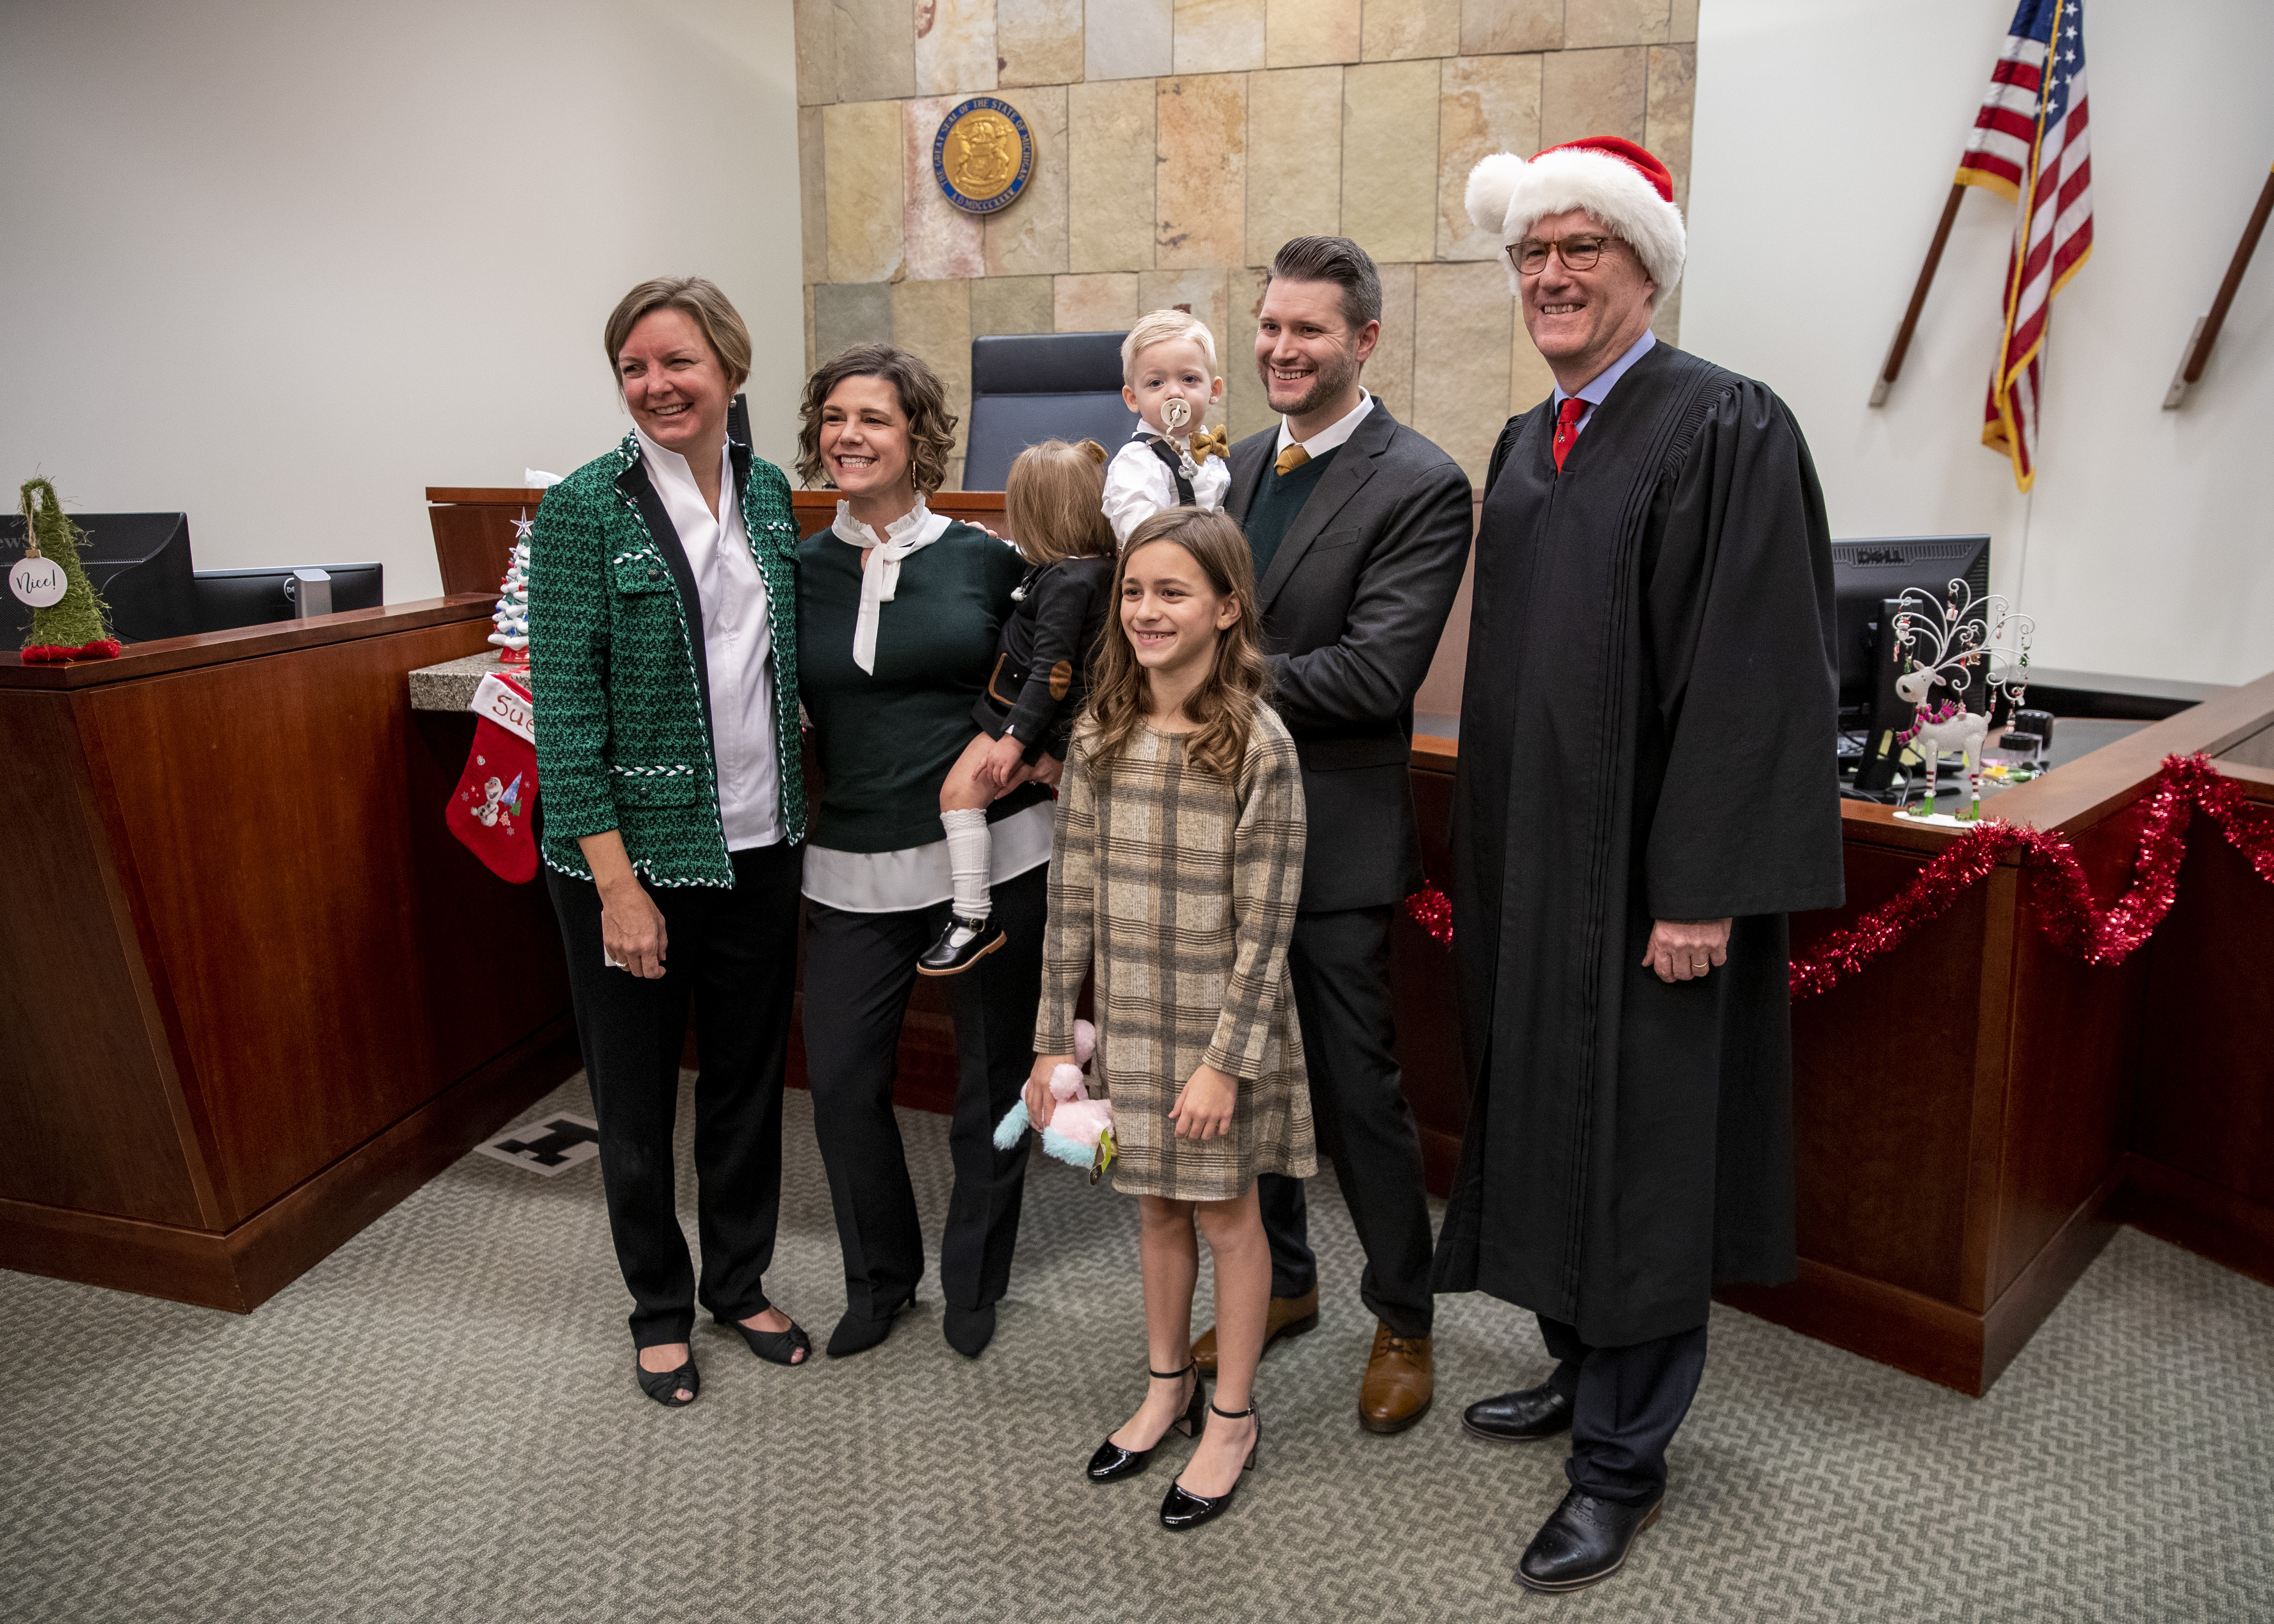 The Myers family poses for pictures with Judge T.J. Ackert, far right, and attorney Melissa Neckers, far left, during Adoption Day at the Kent County Courthouse in Grand Rapids on Thursday, Dec. 8, 2022. Tammy and Jordan Myers are the biological parents of 1-year-old twins Eames, center right, and Ellison. Lauren Vermilye, a surrogate, gave birth to the twins after Tammy went through breast cancer treatment and has no claim to the babies. The Myers family was able to adopt the twins after convincing the court system to grant them custody. Also pictured is their daughter, Corryn Myers, 10.(Cory Morse | MLive.com)